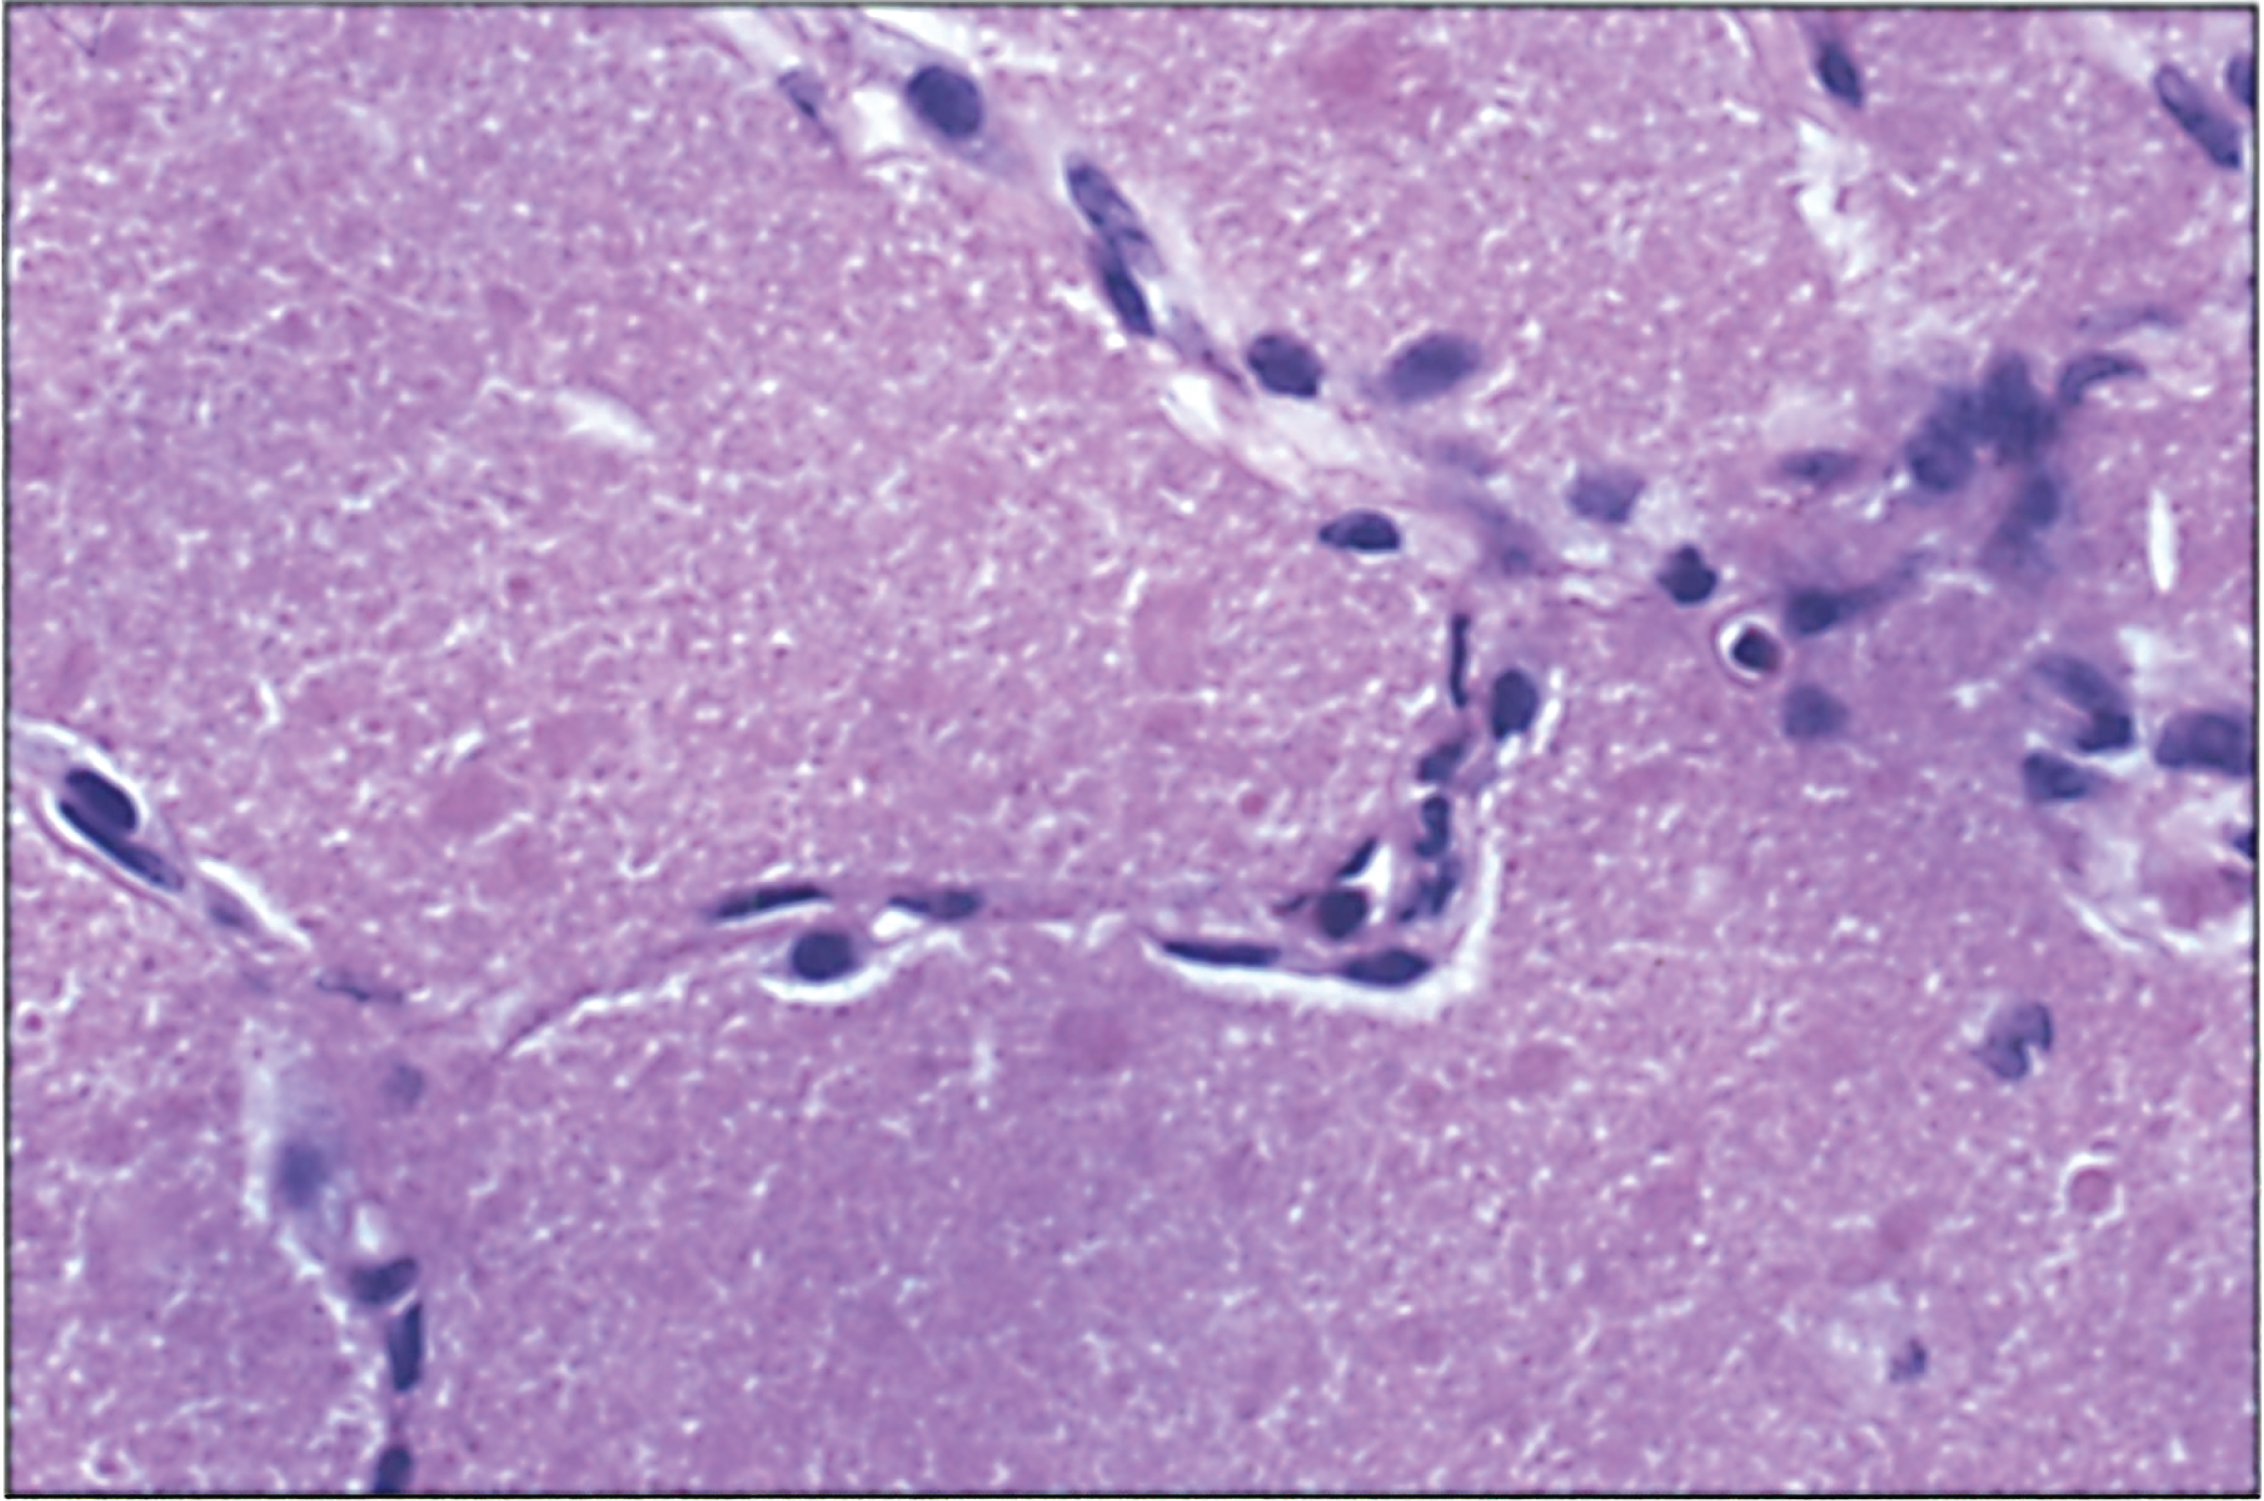 Microscopic section of lung showing alveolar proteinosis as may be seen in lysinuric protein intolerance. The alveoli are filled with proteinaceous material that is periodic acid-Schiff (PAS) positive.